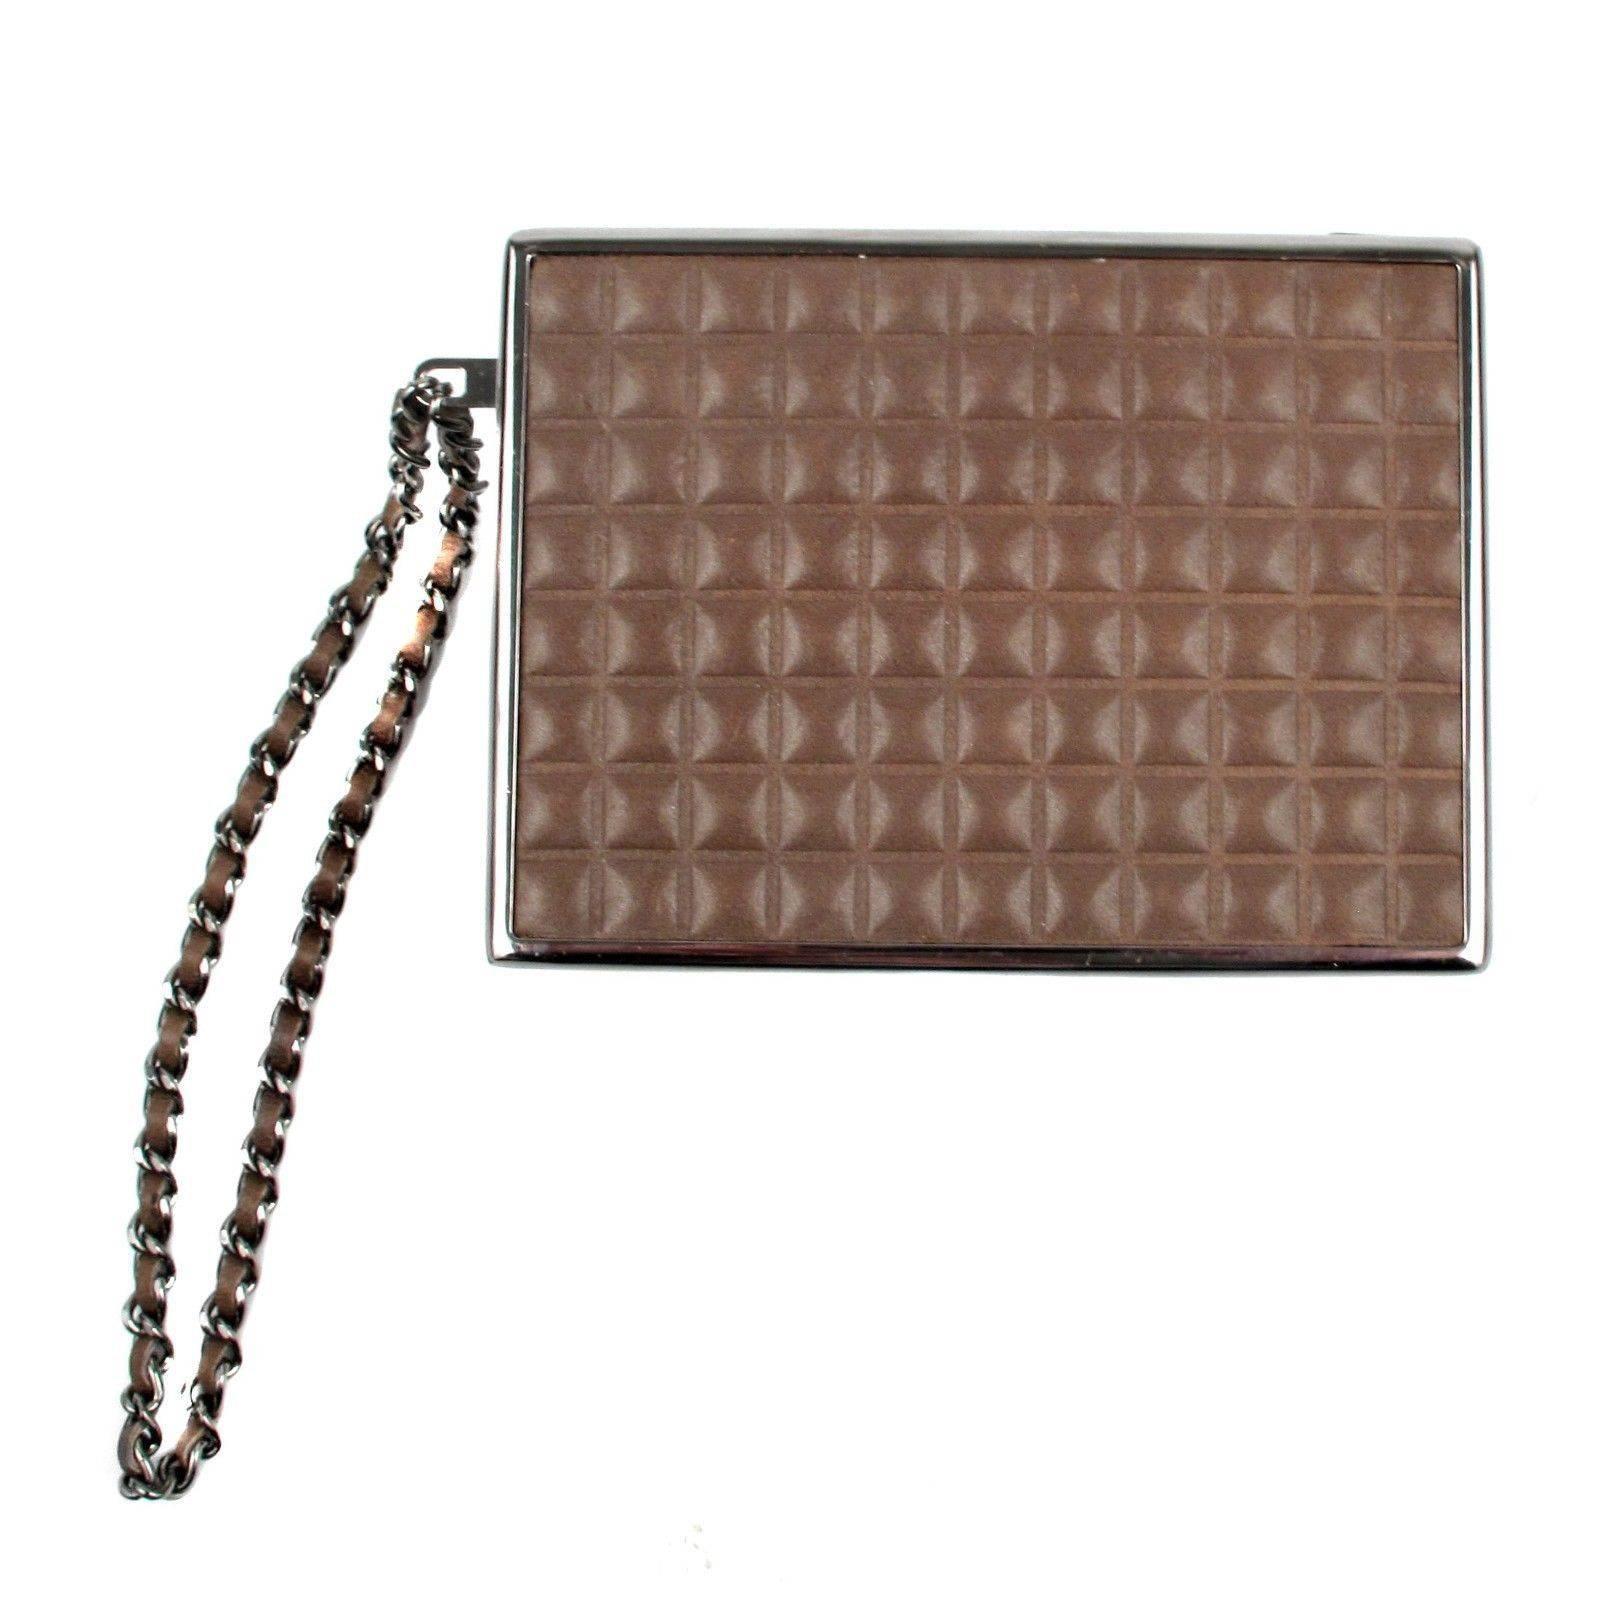 Chanel - Cigarette Box Clutch Minaudiere

 Color: Brown / Silver

Material: Leather / Metal

------------------------------------------------------------

Details:

- can be worn with or without the wrist strap

- wrist strap can be